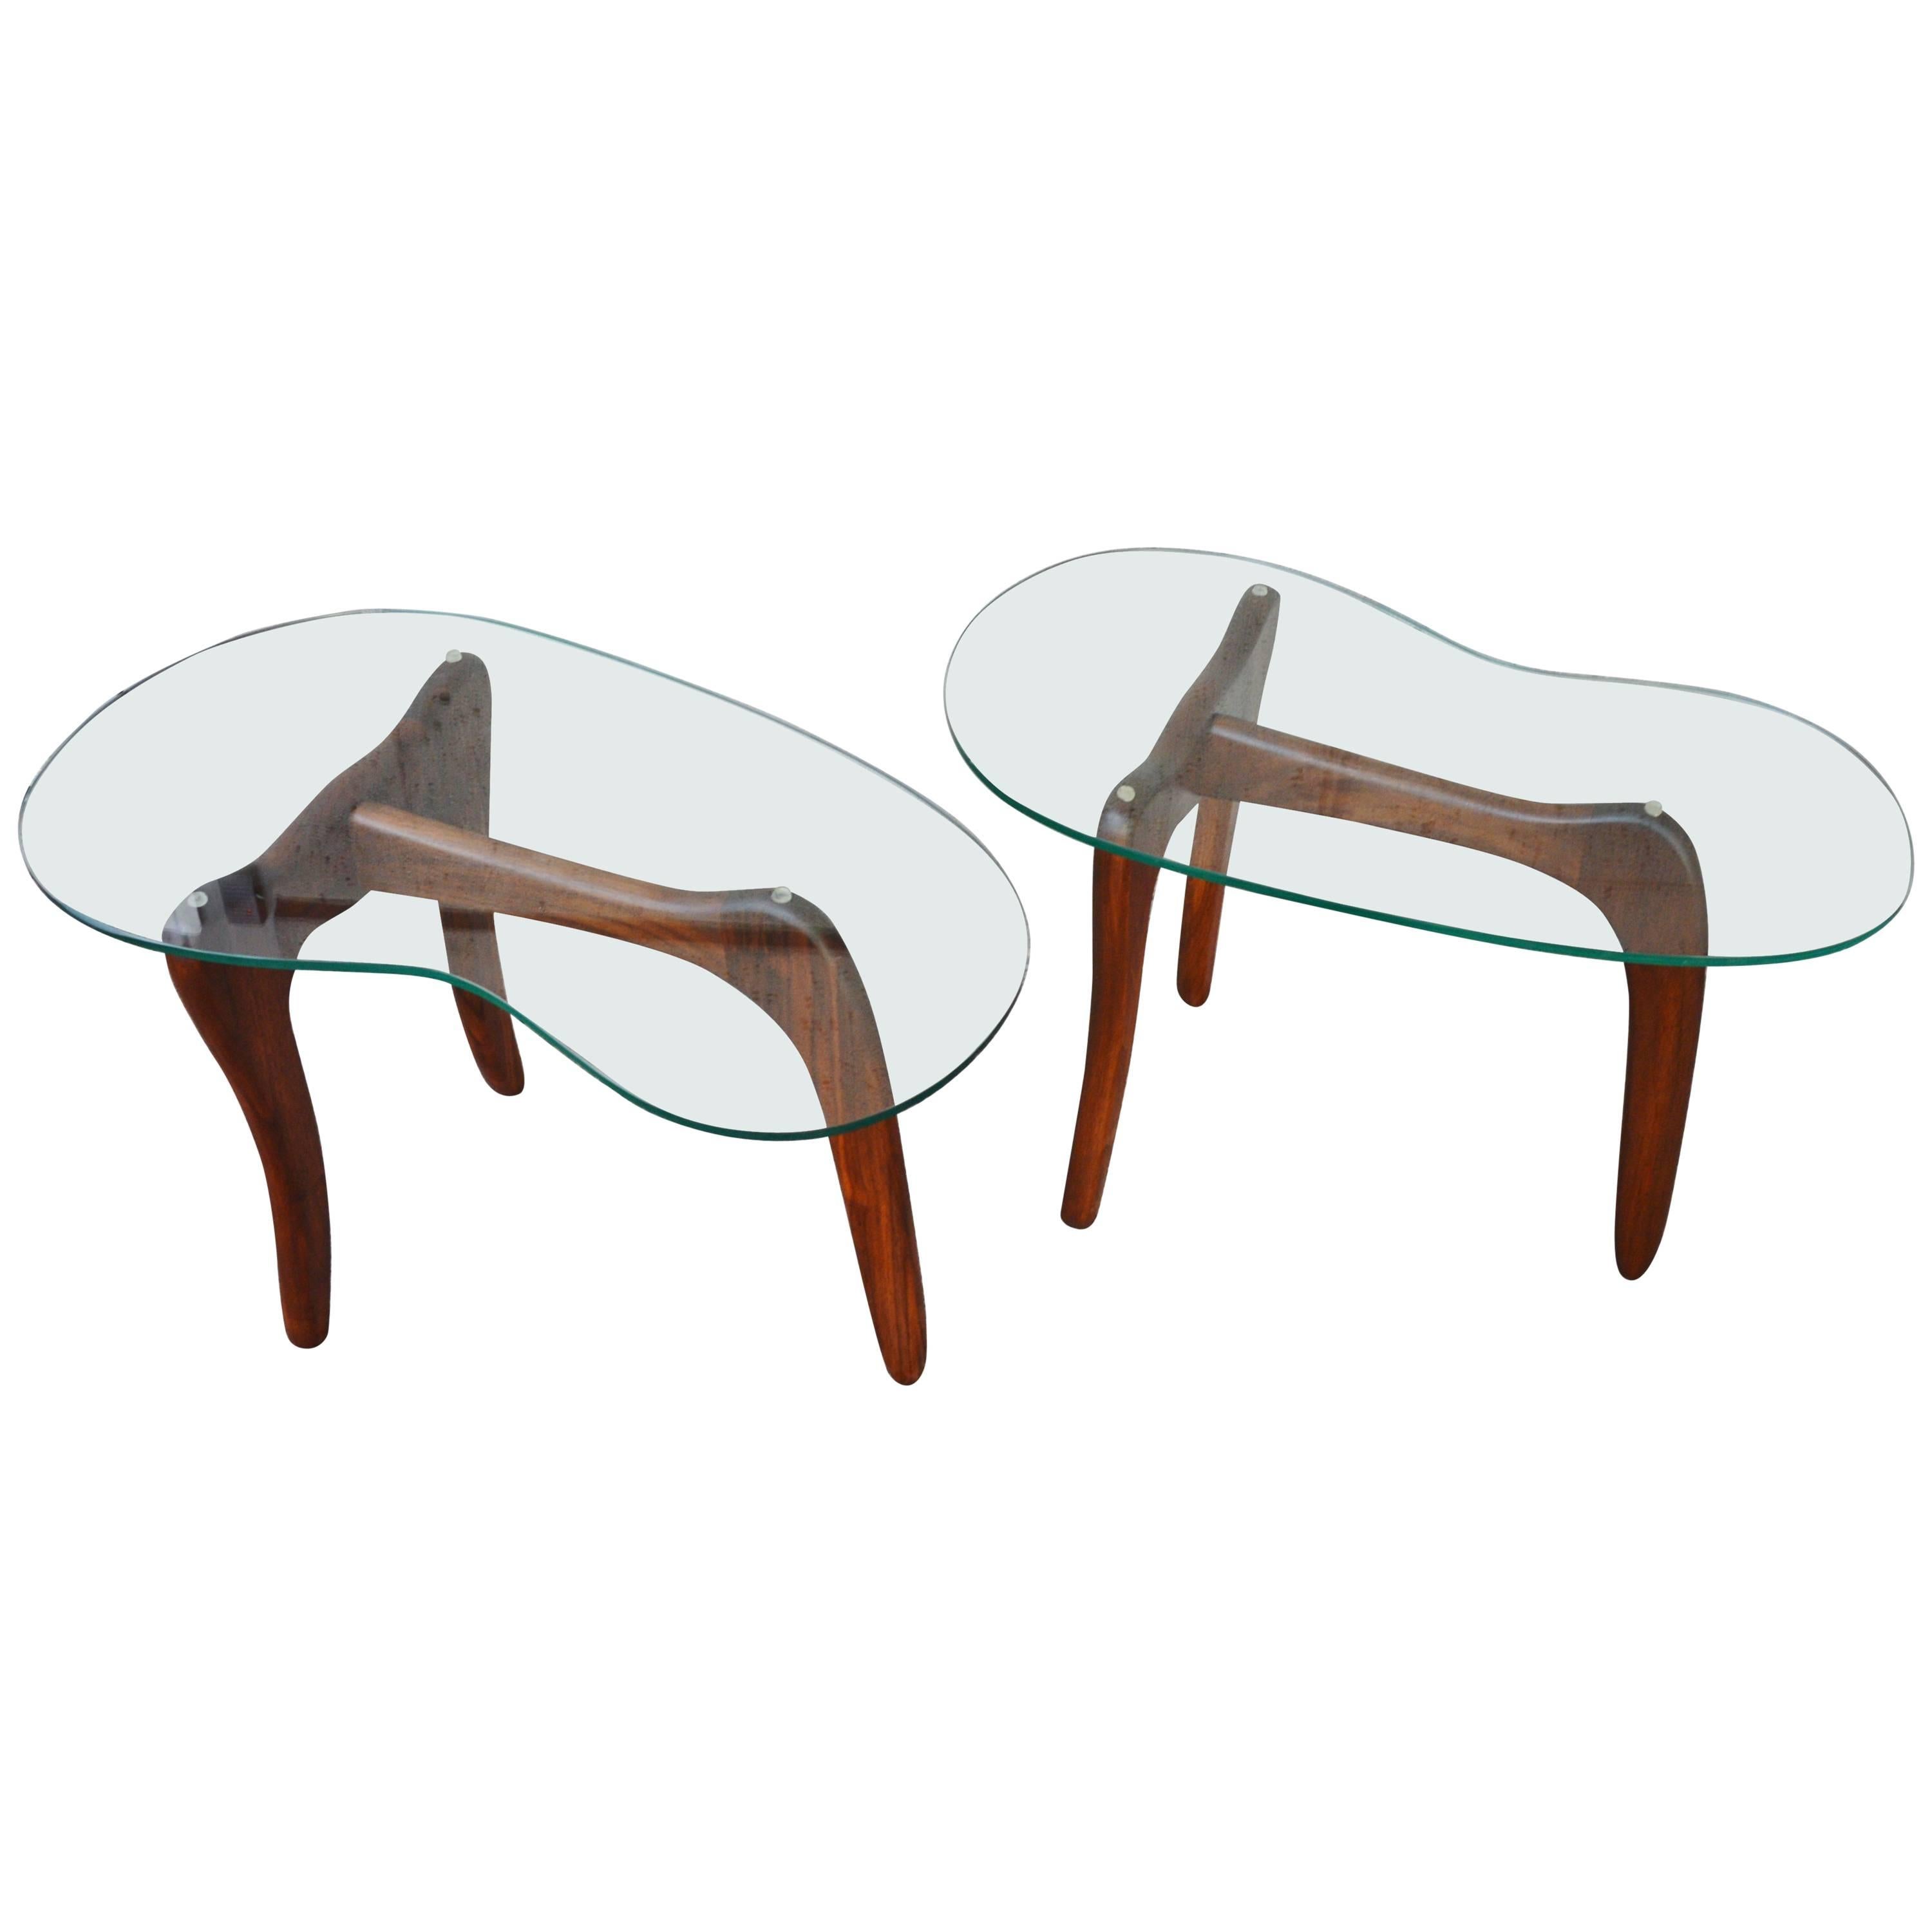 Pair of Adrian Pearsall Solid Walnut Side Tables, Kidney Shape Glass Tops